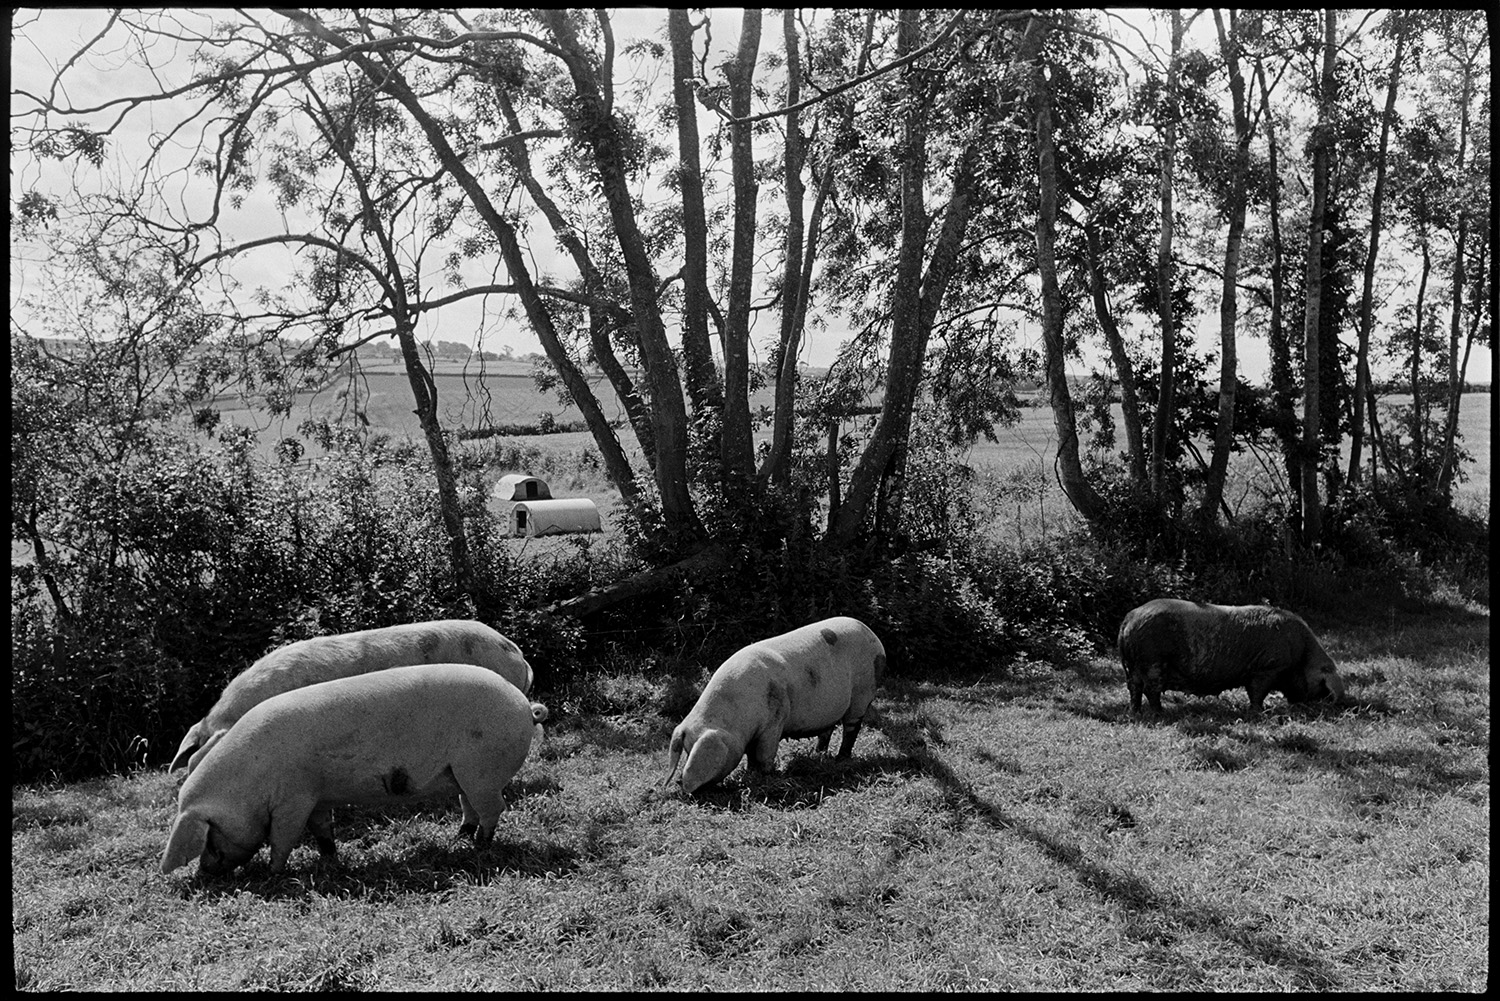 Woman farmer and pigs. 
[Pigs grazing by a hedgerow with trees in a field at Heal Farm, Kings Nympton. Corrugated iron arced sheds can be seen in a field in the background.]